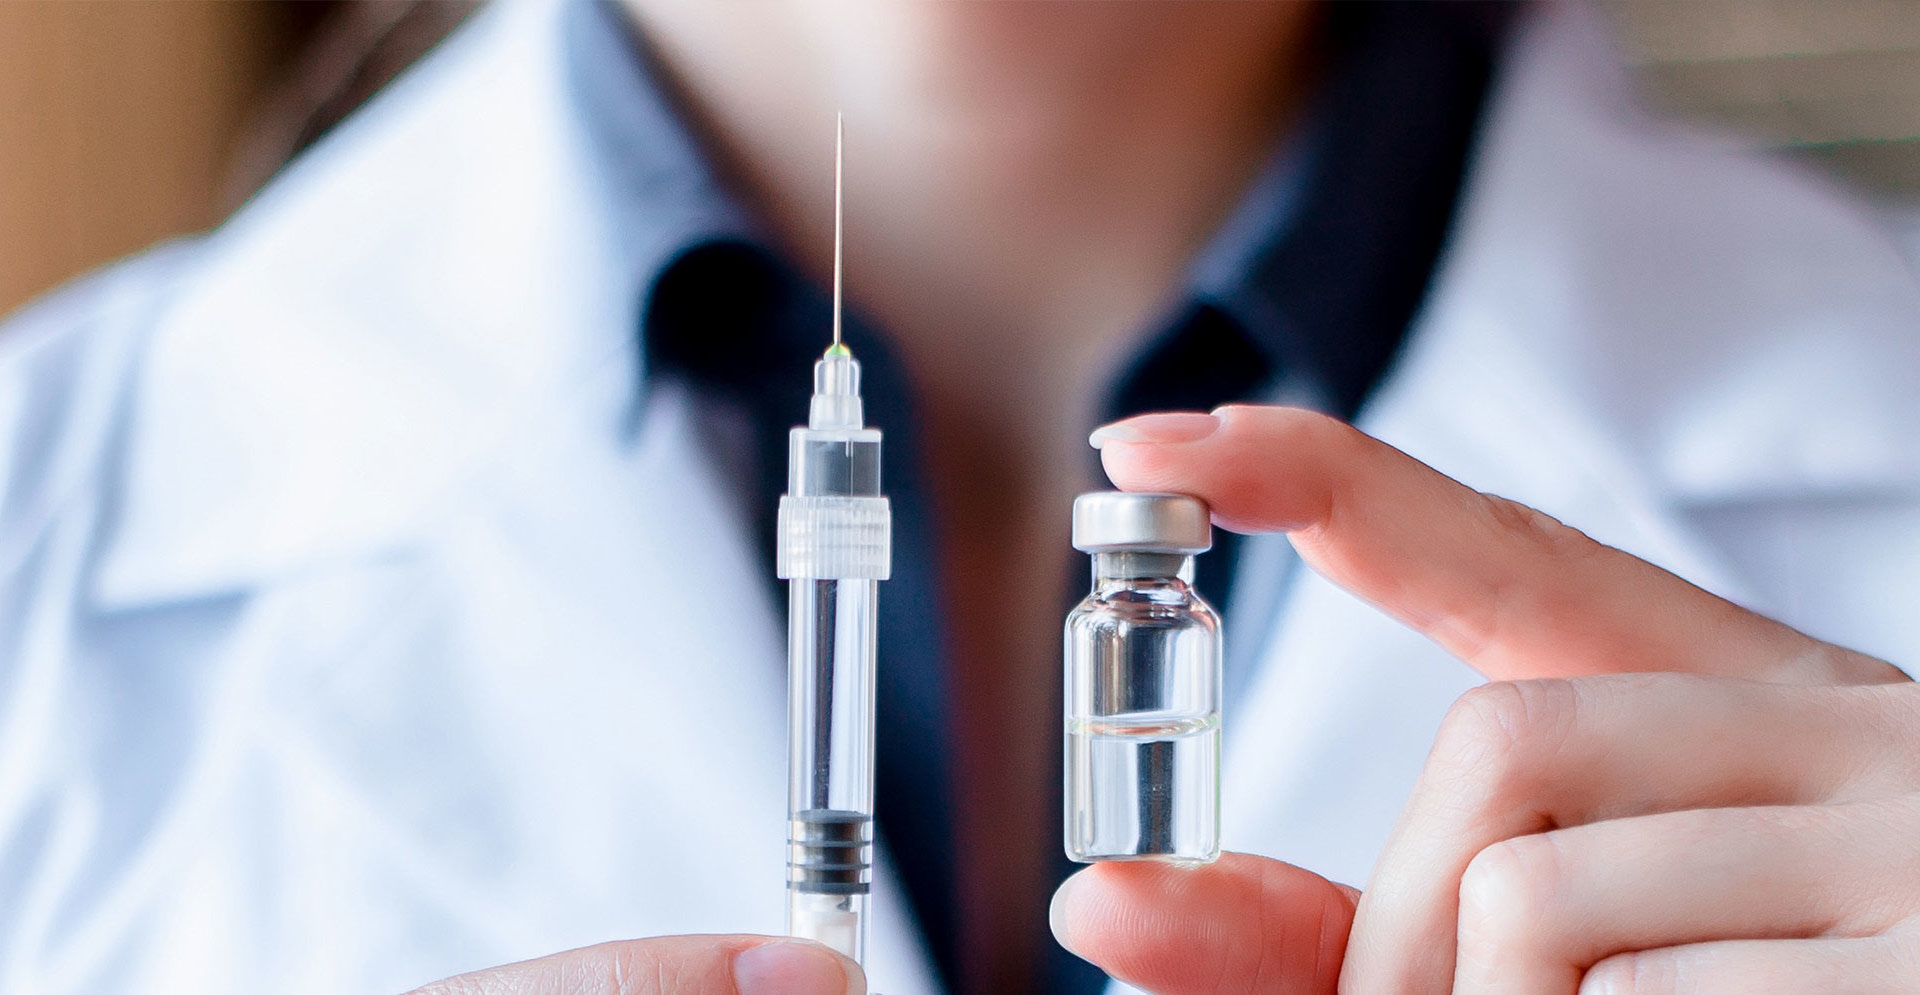 Where to buy real injectable HGH without getting scammed?